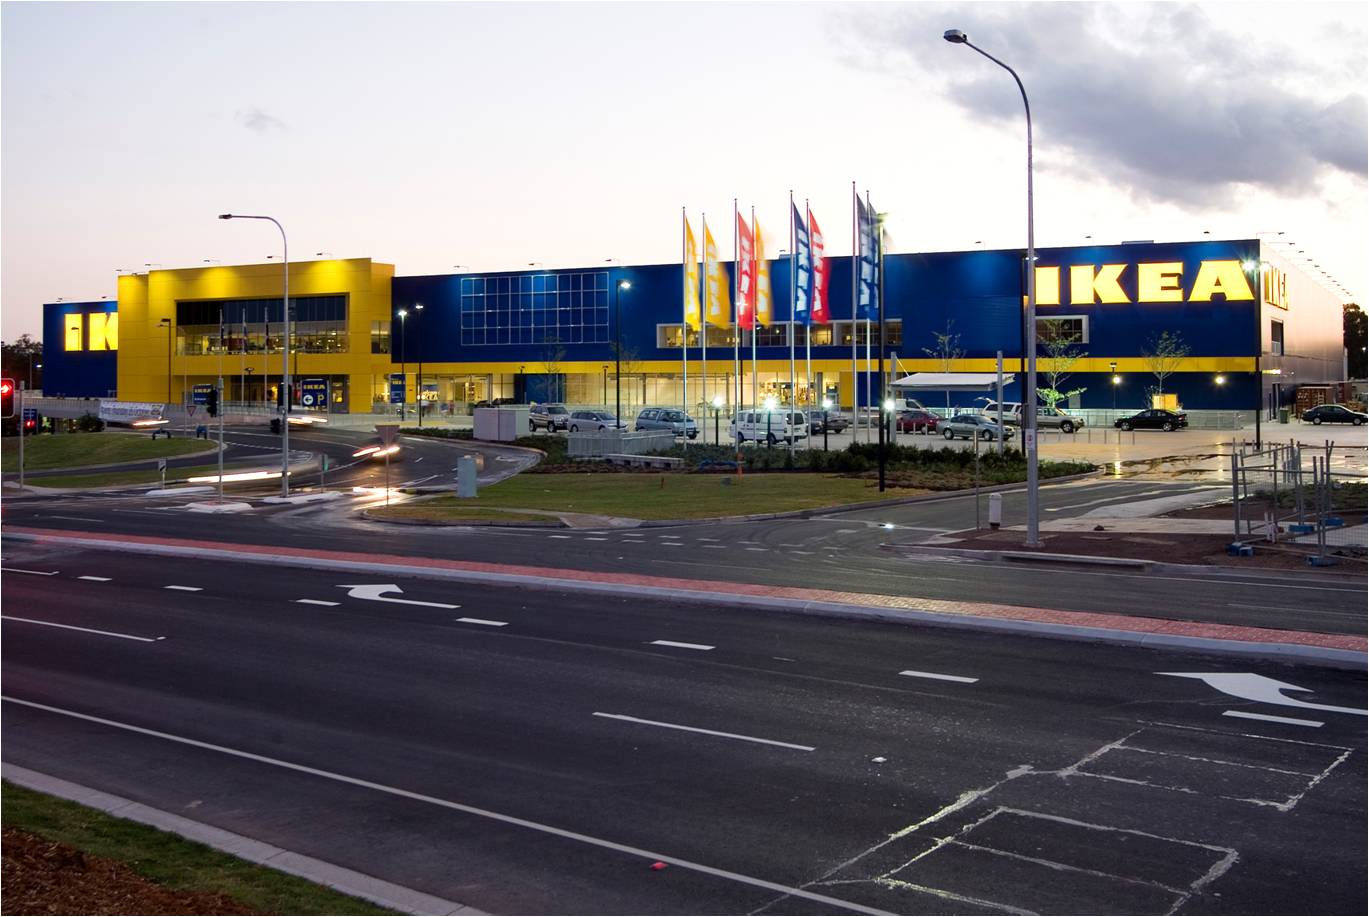 IKEA — Building Services Engineers